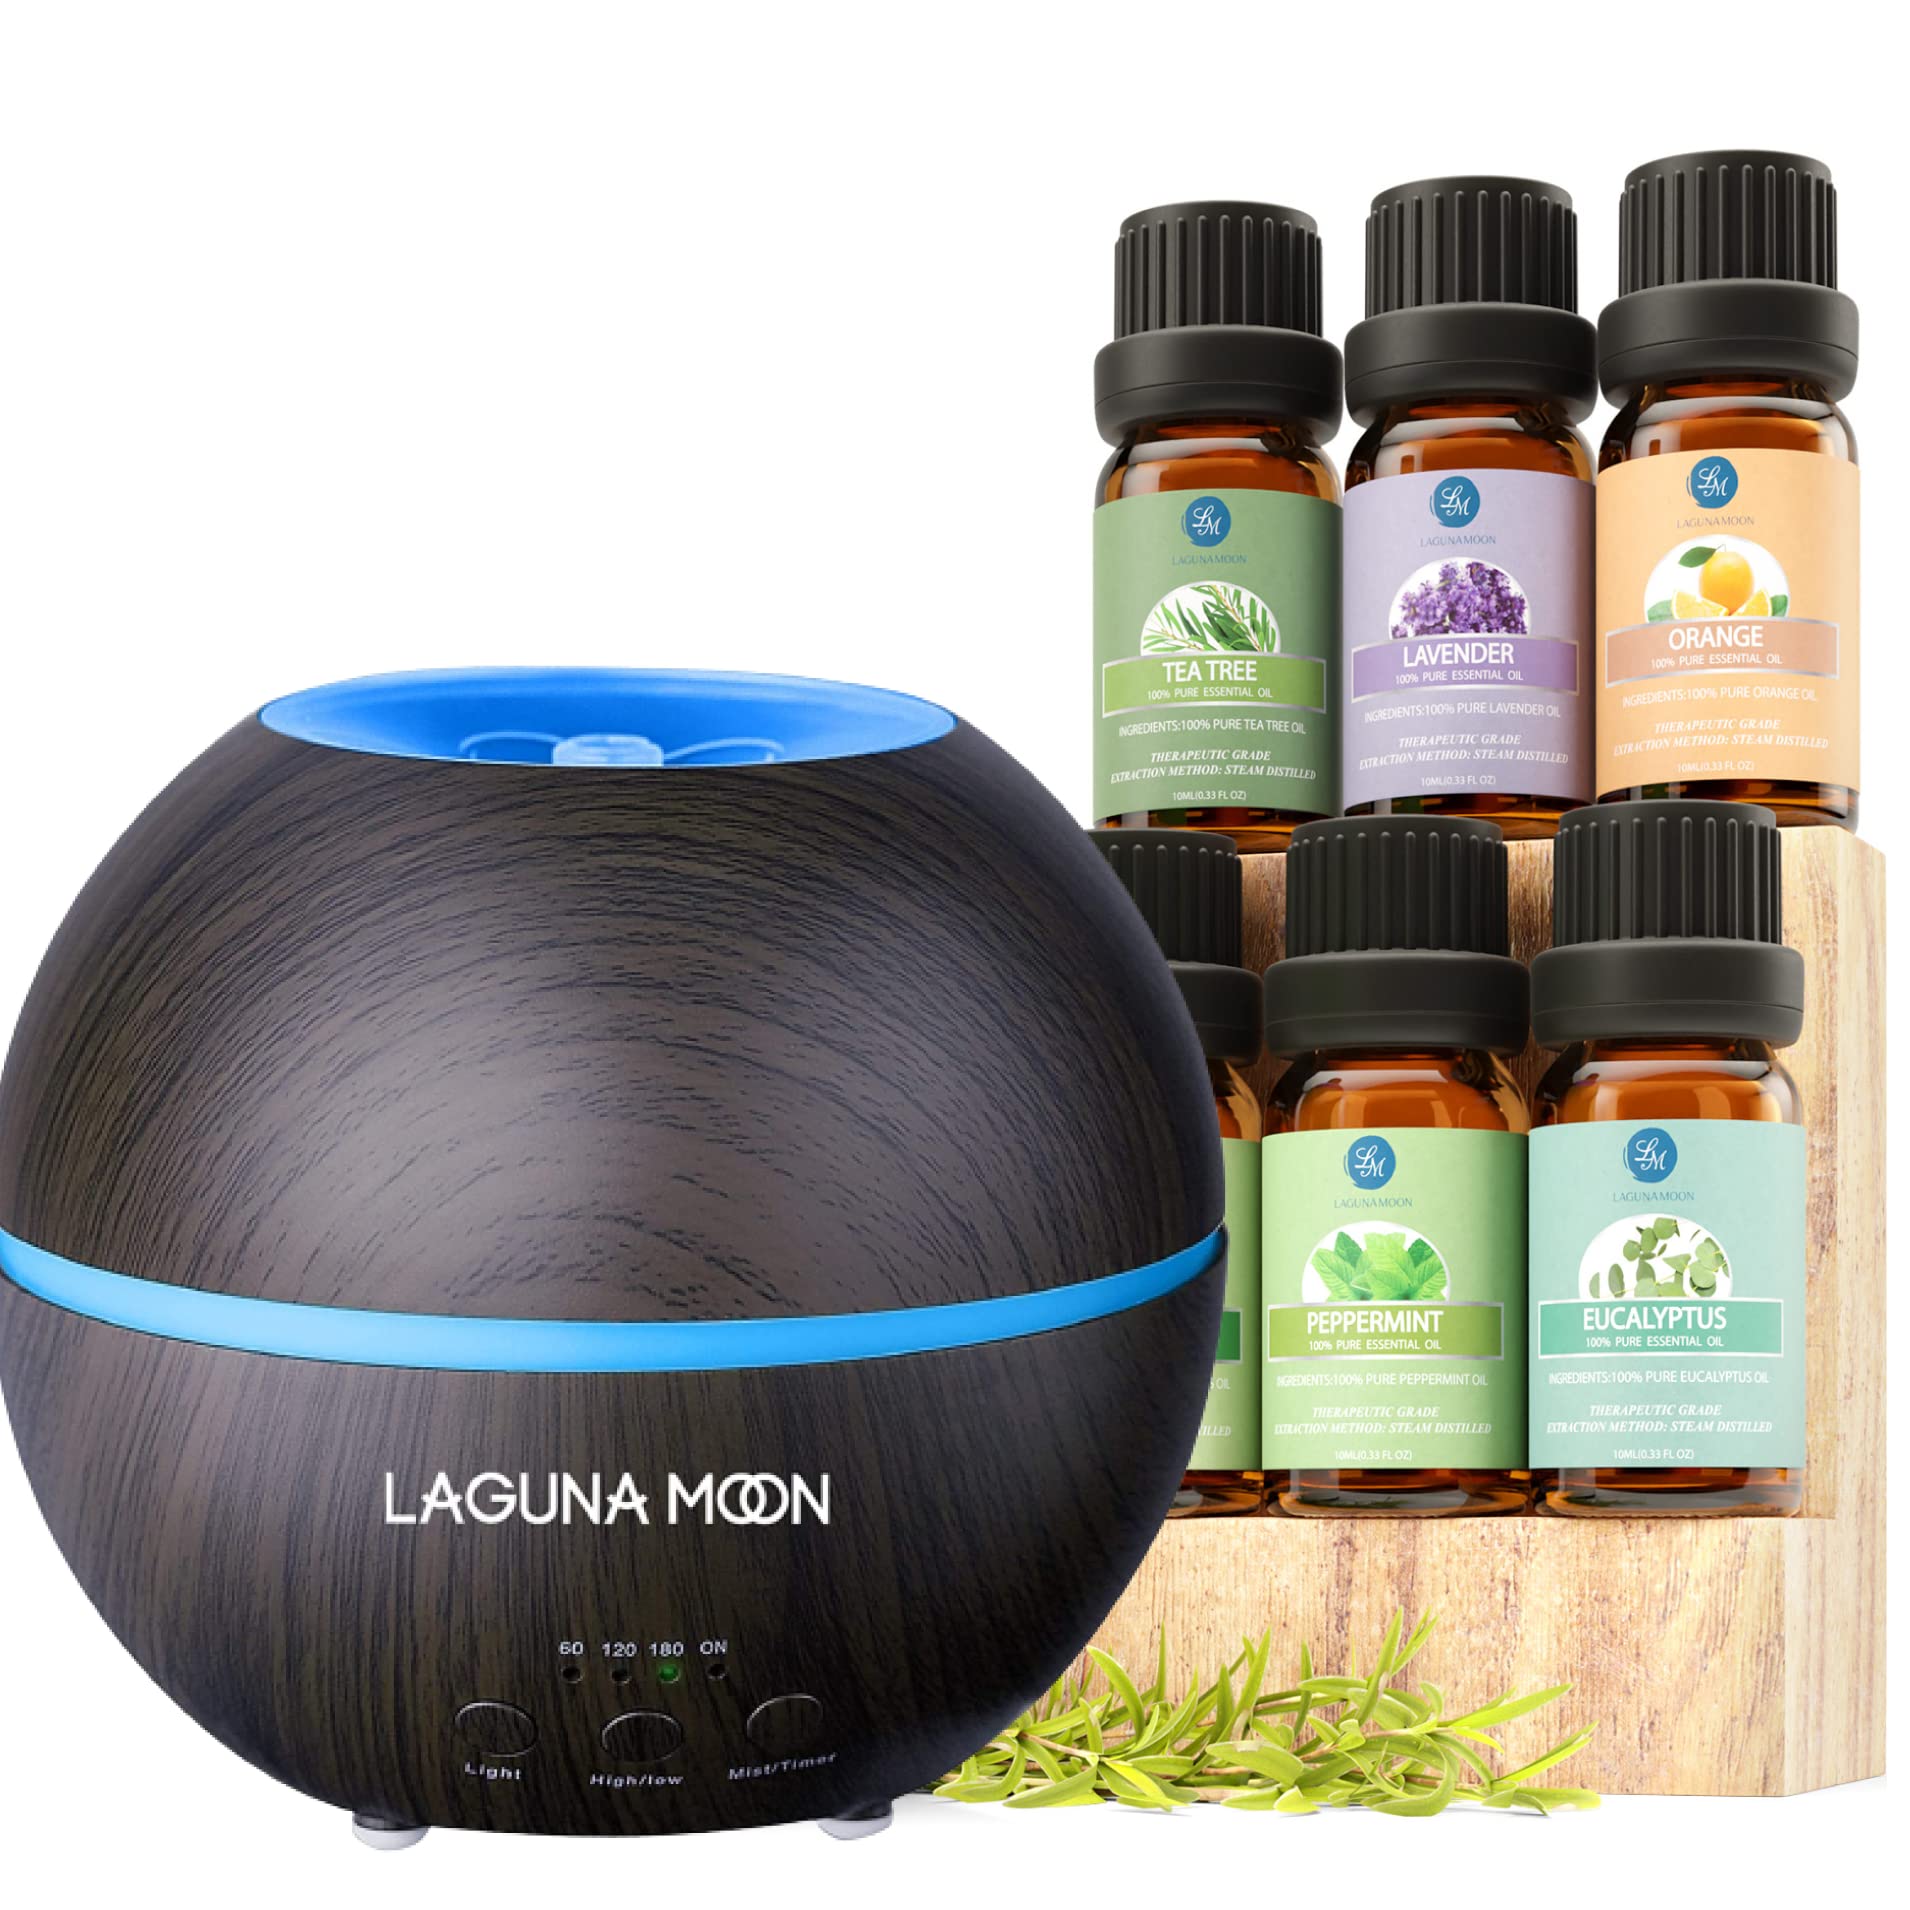 Top Essential Oil Set with Diffuser Bundle - Essential Oil Diffuser Gift for Scented DIY Home Office, Yoga, Fresh Air, Adjustable Mist Mode